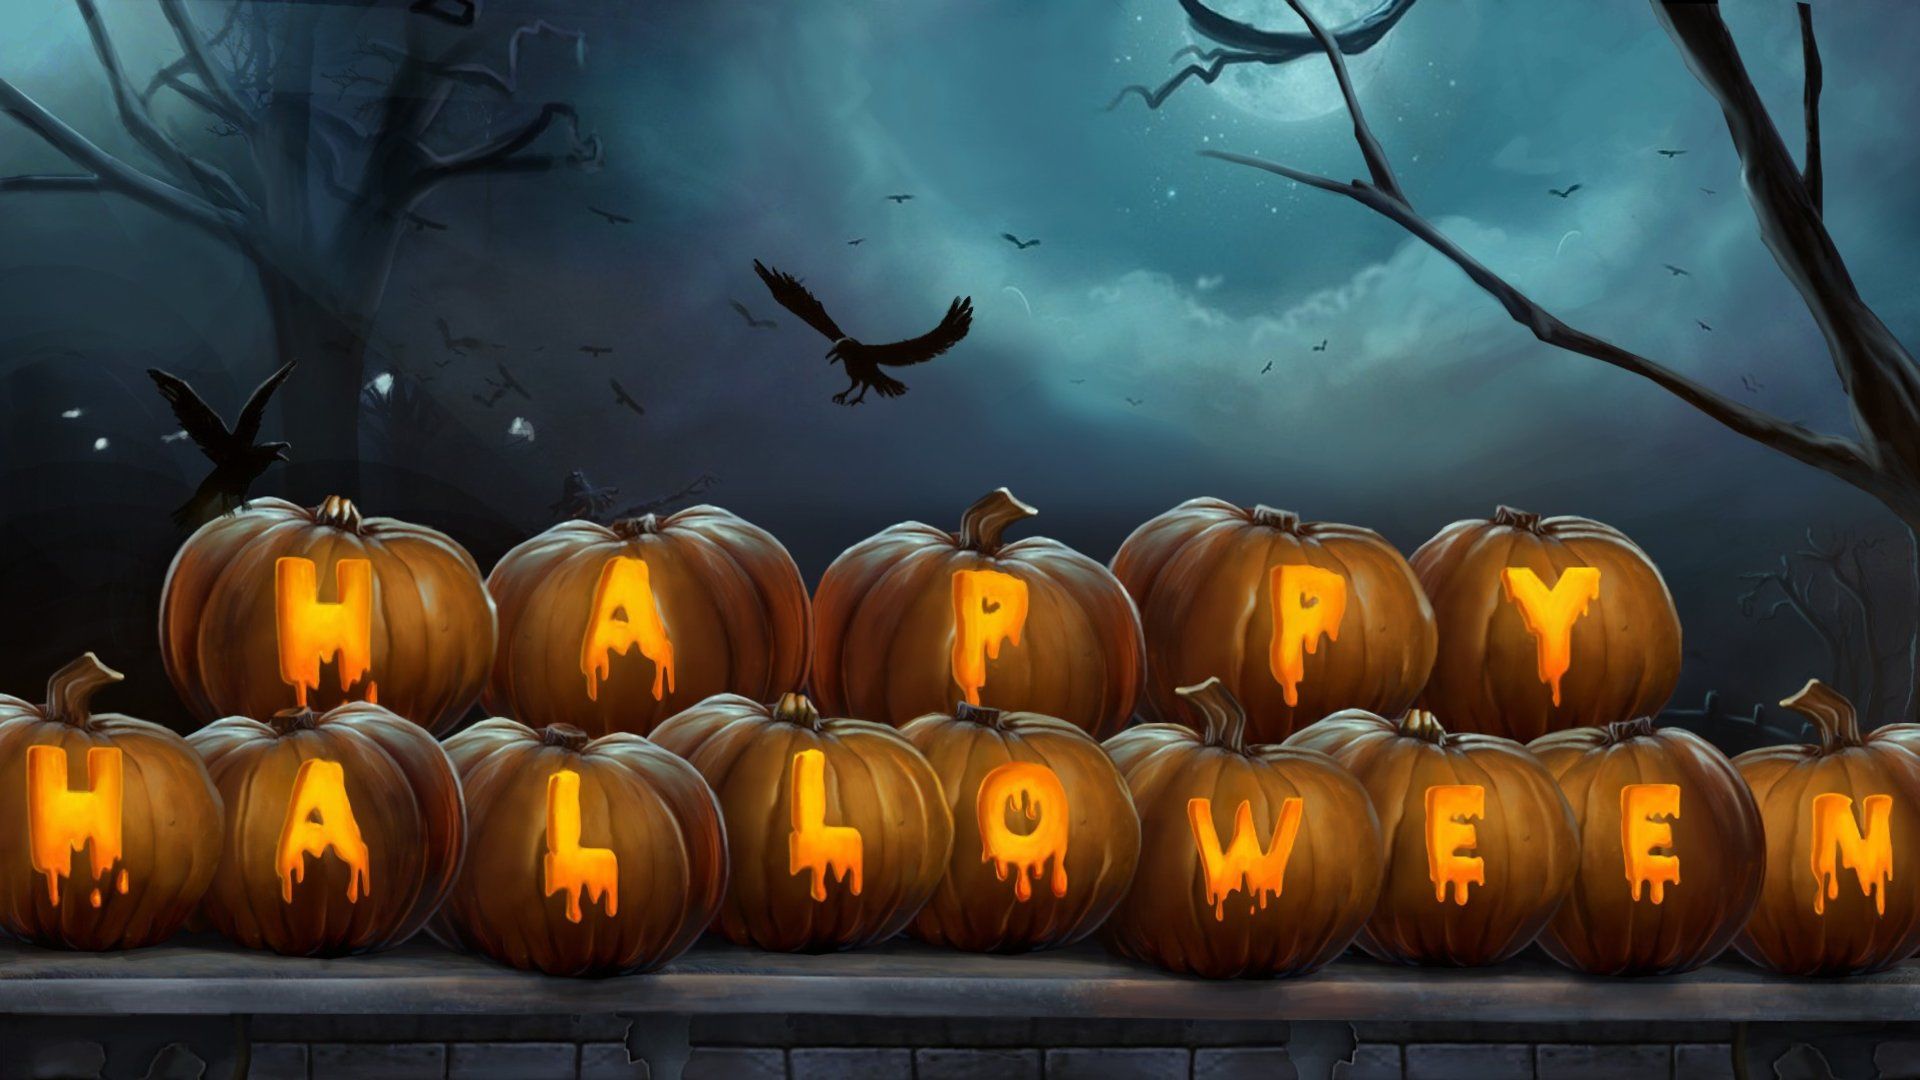 Trick or Treat! 20 HD wallpaper for your Halloween spirit